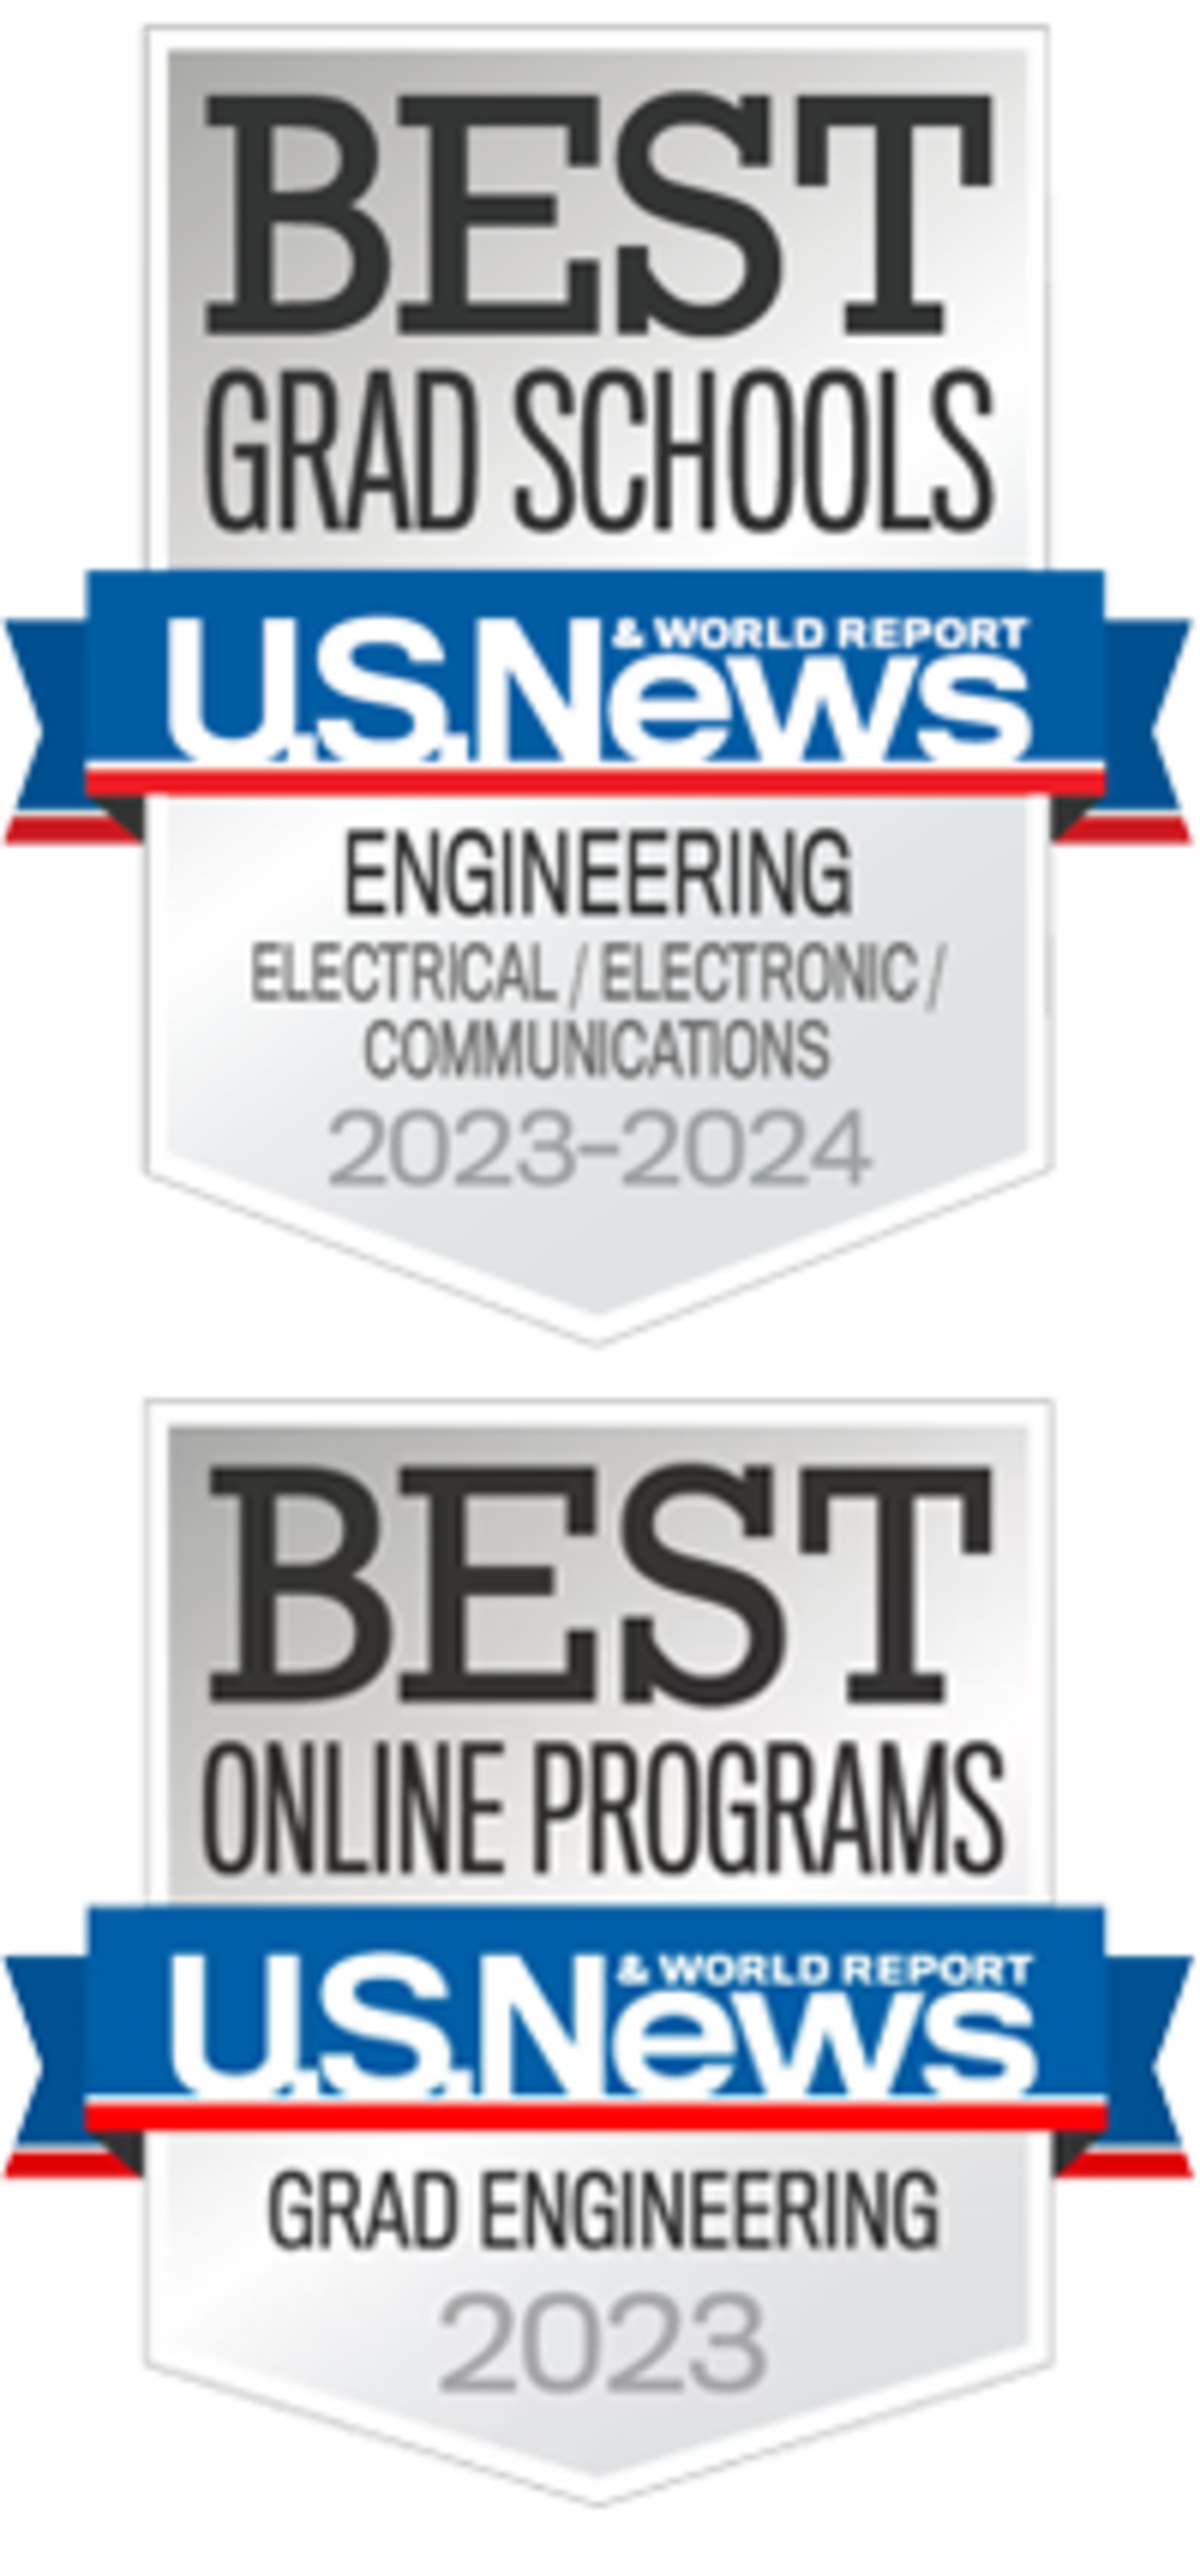 U.S. News and World Report 2023-24 Best Electrical / Electronic / Communications Engineering and 2023 Best Online Grad Engineering Badges